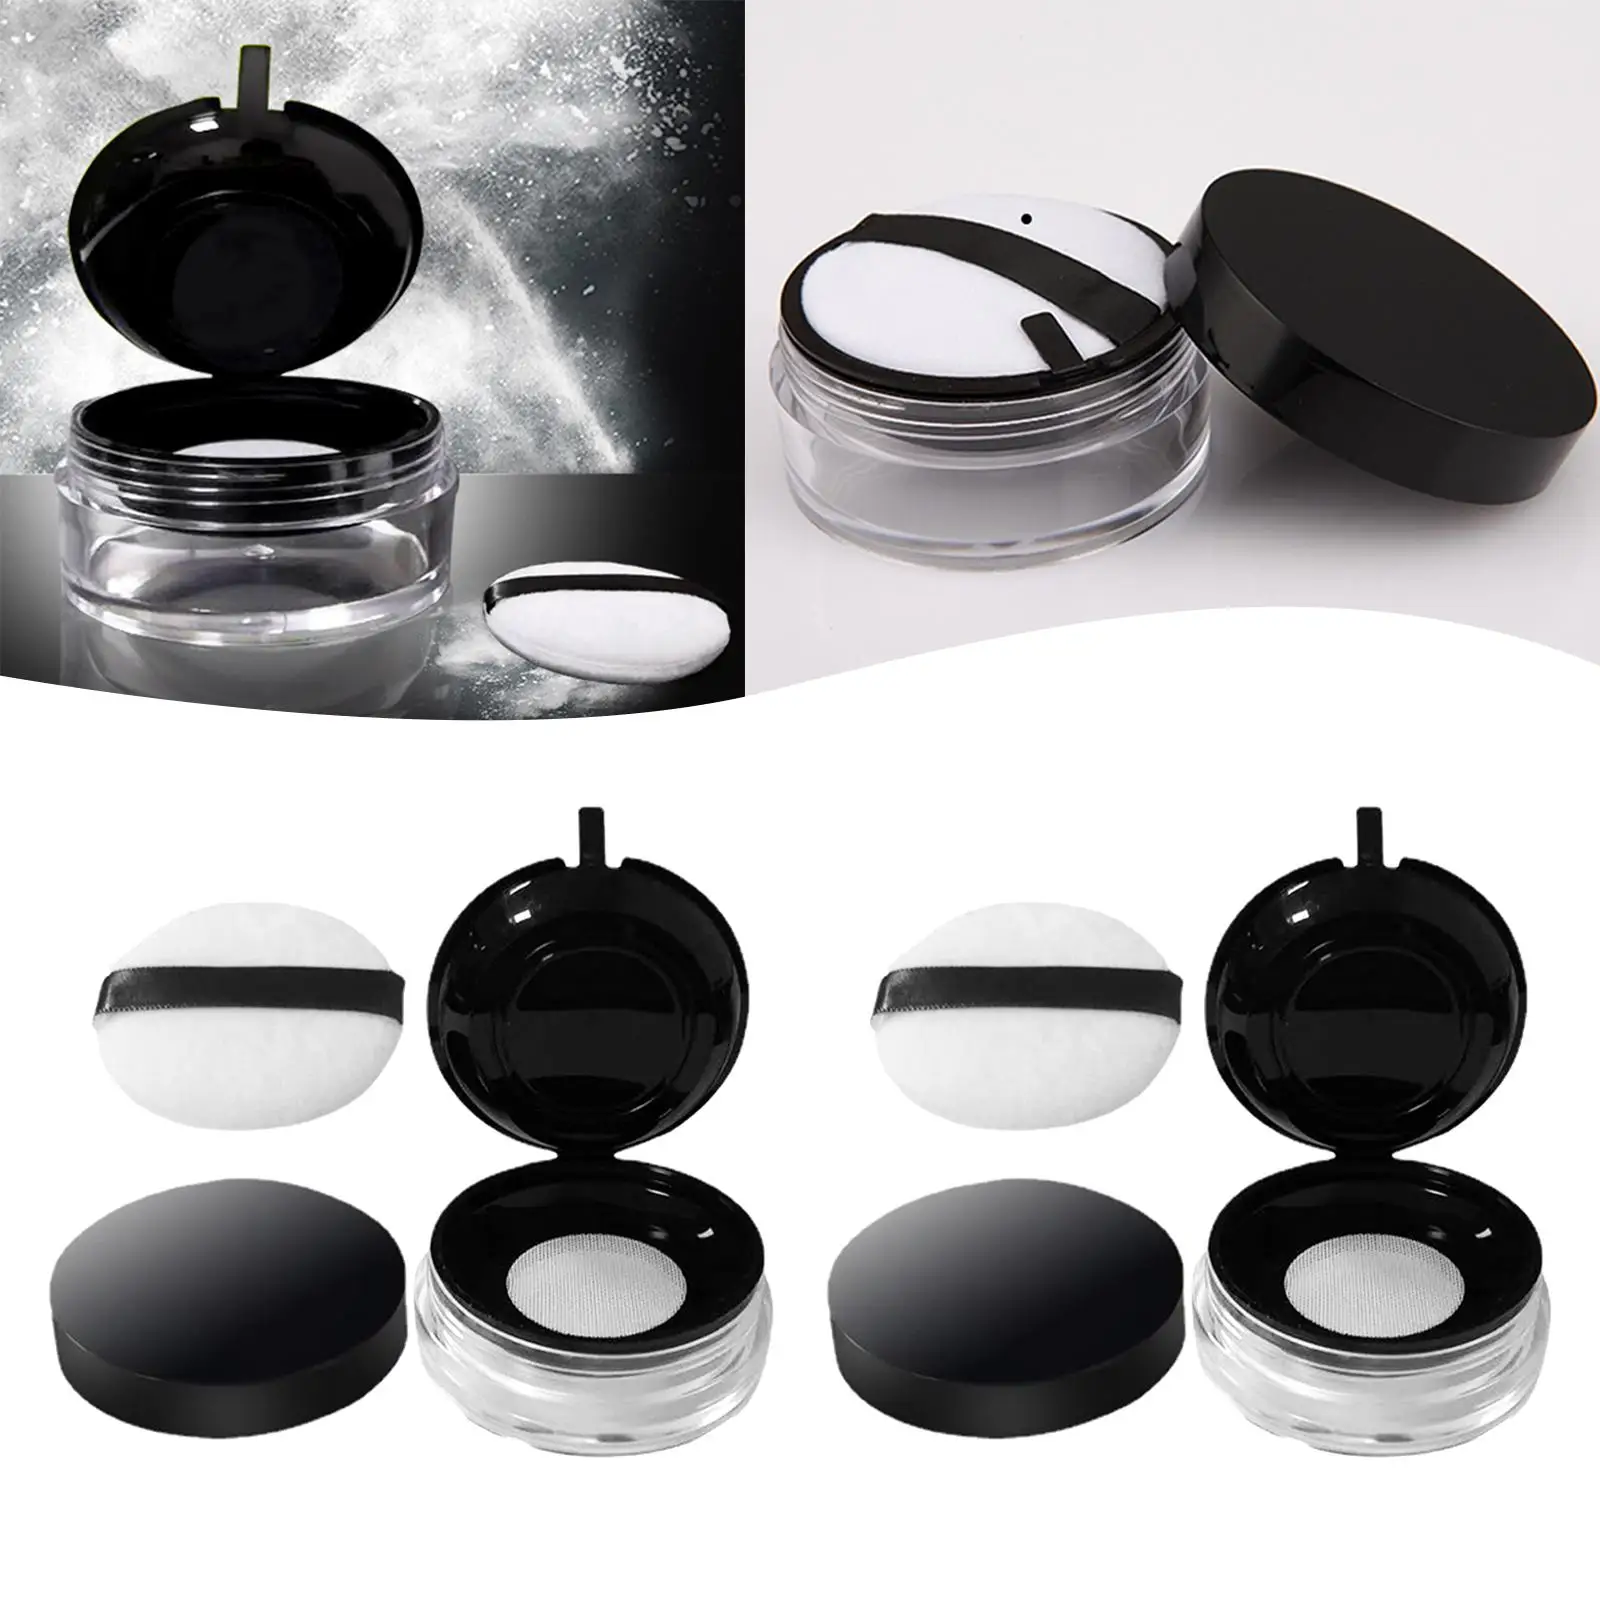 2 Pieces Empty Makeup Powder Case with Puff Accessories DIY Household Use Compact Plastic Capacity 15G Reusable Wide Usages